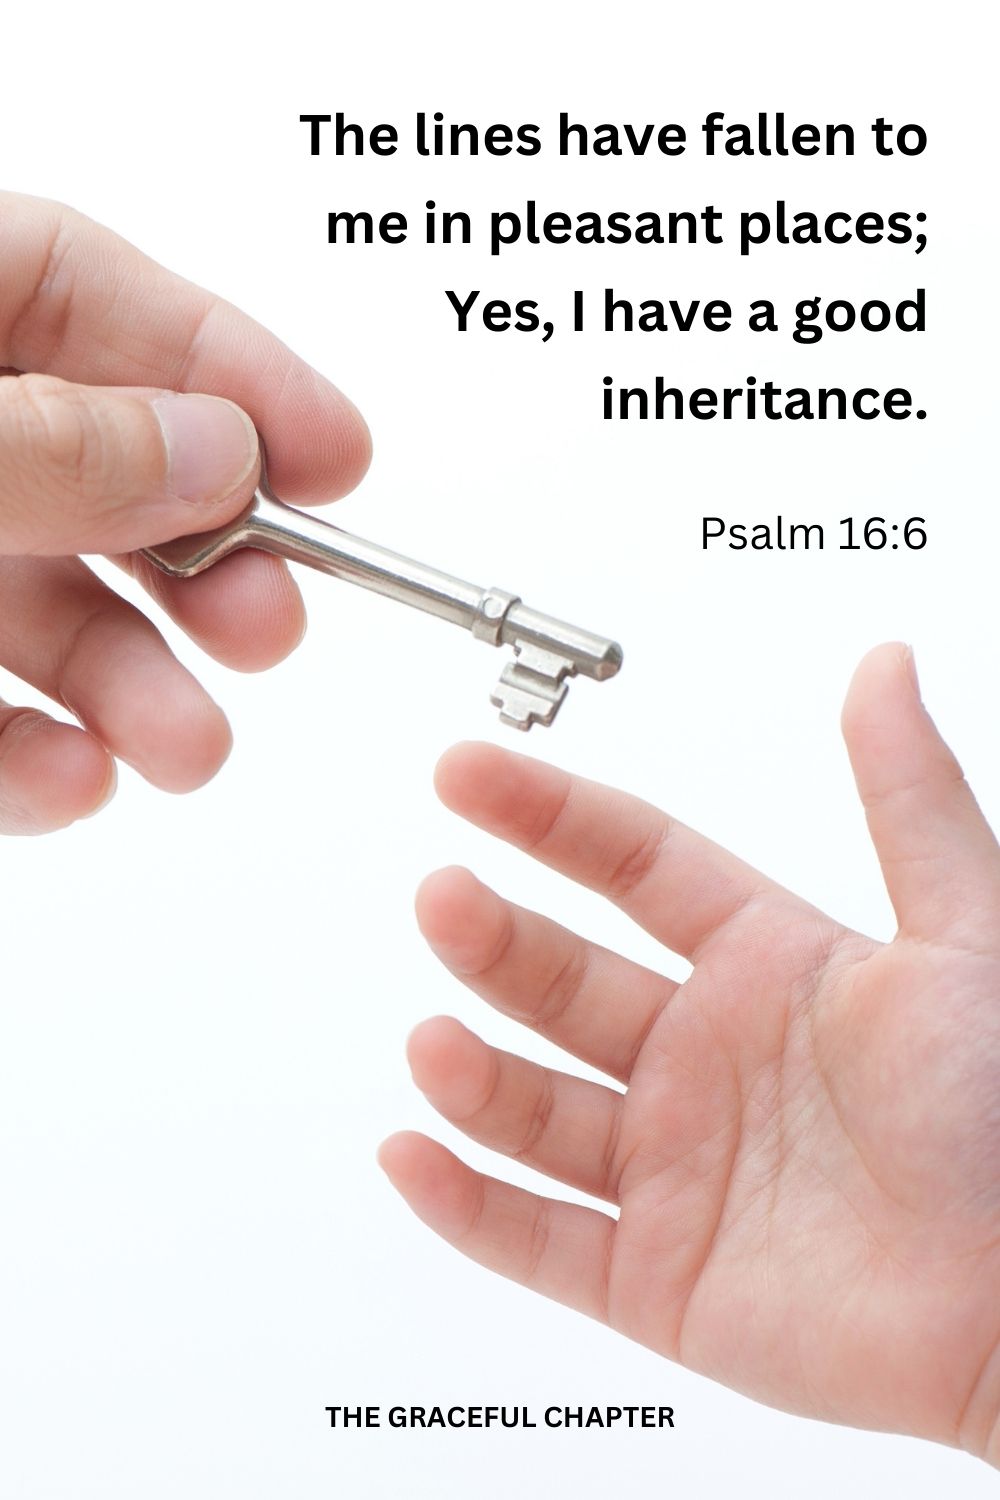 The lines have fallen to me in pleasant places; Yes, I have a good inheritance. Psalm 16:6